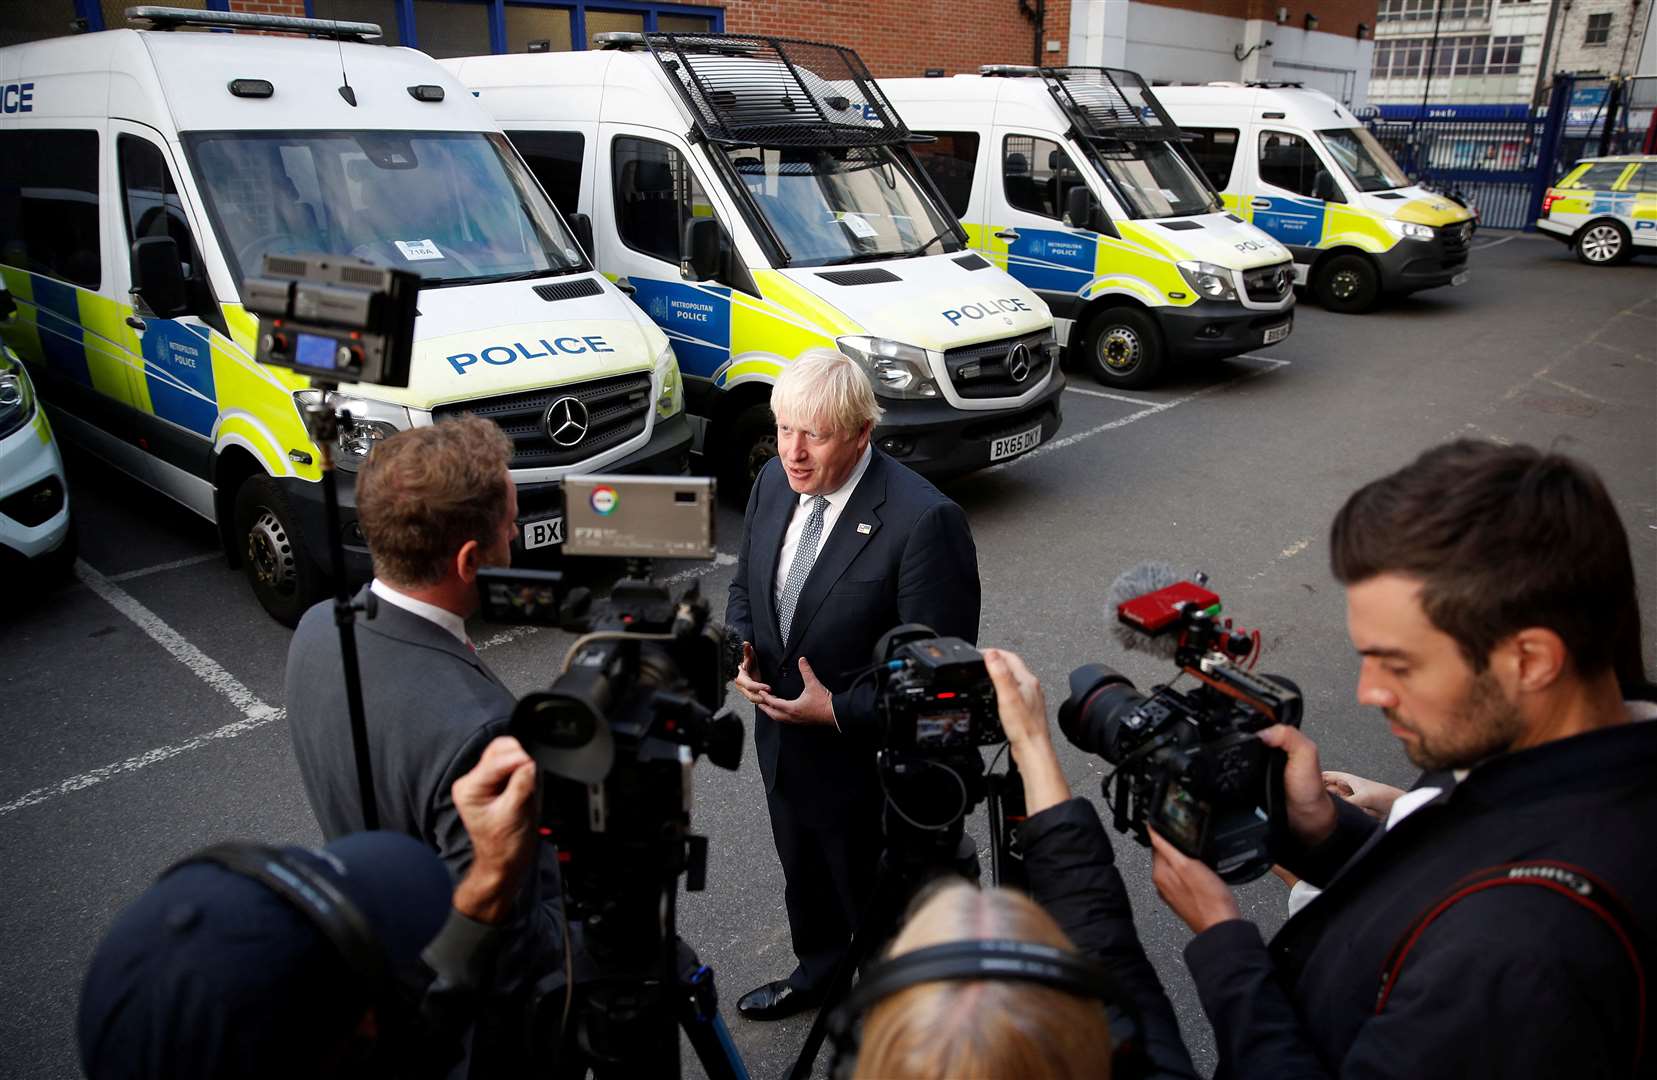 Mr Johnson speaks to the media at a police station in south east London (Peter Nicholls/PA)